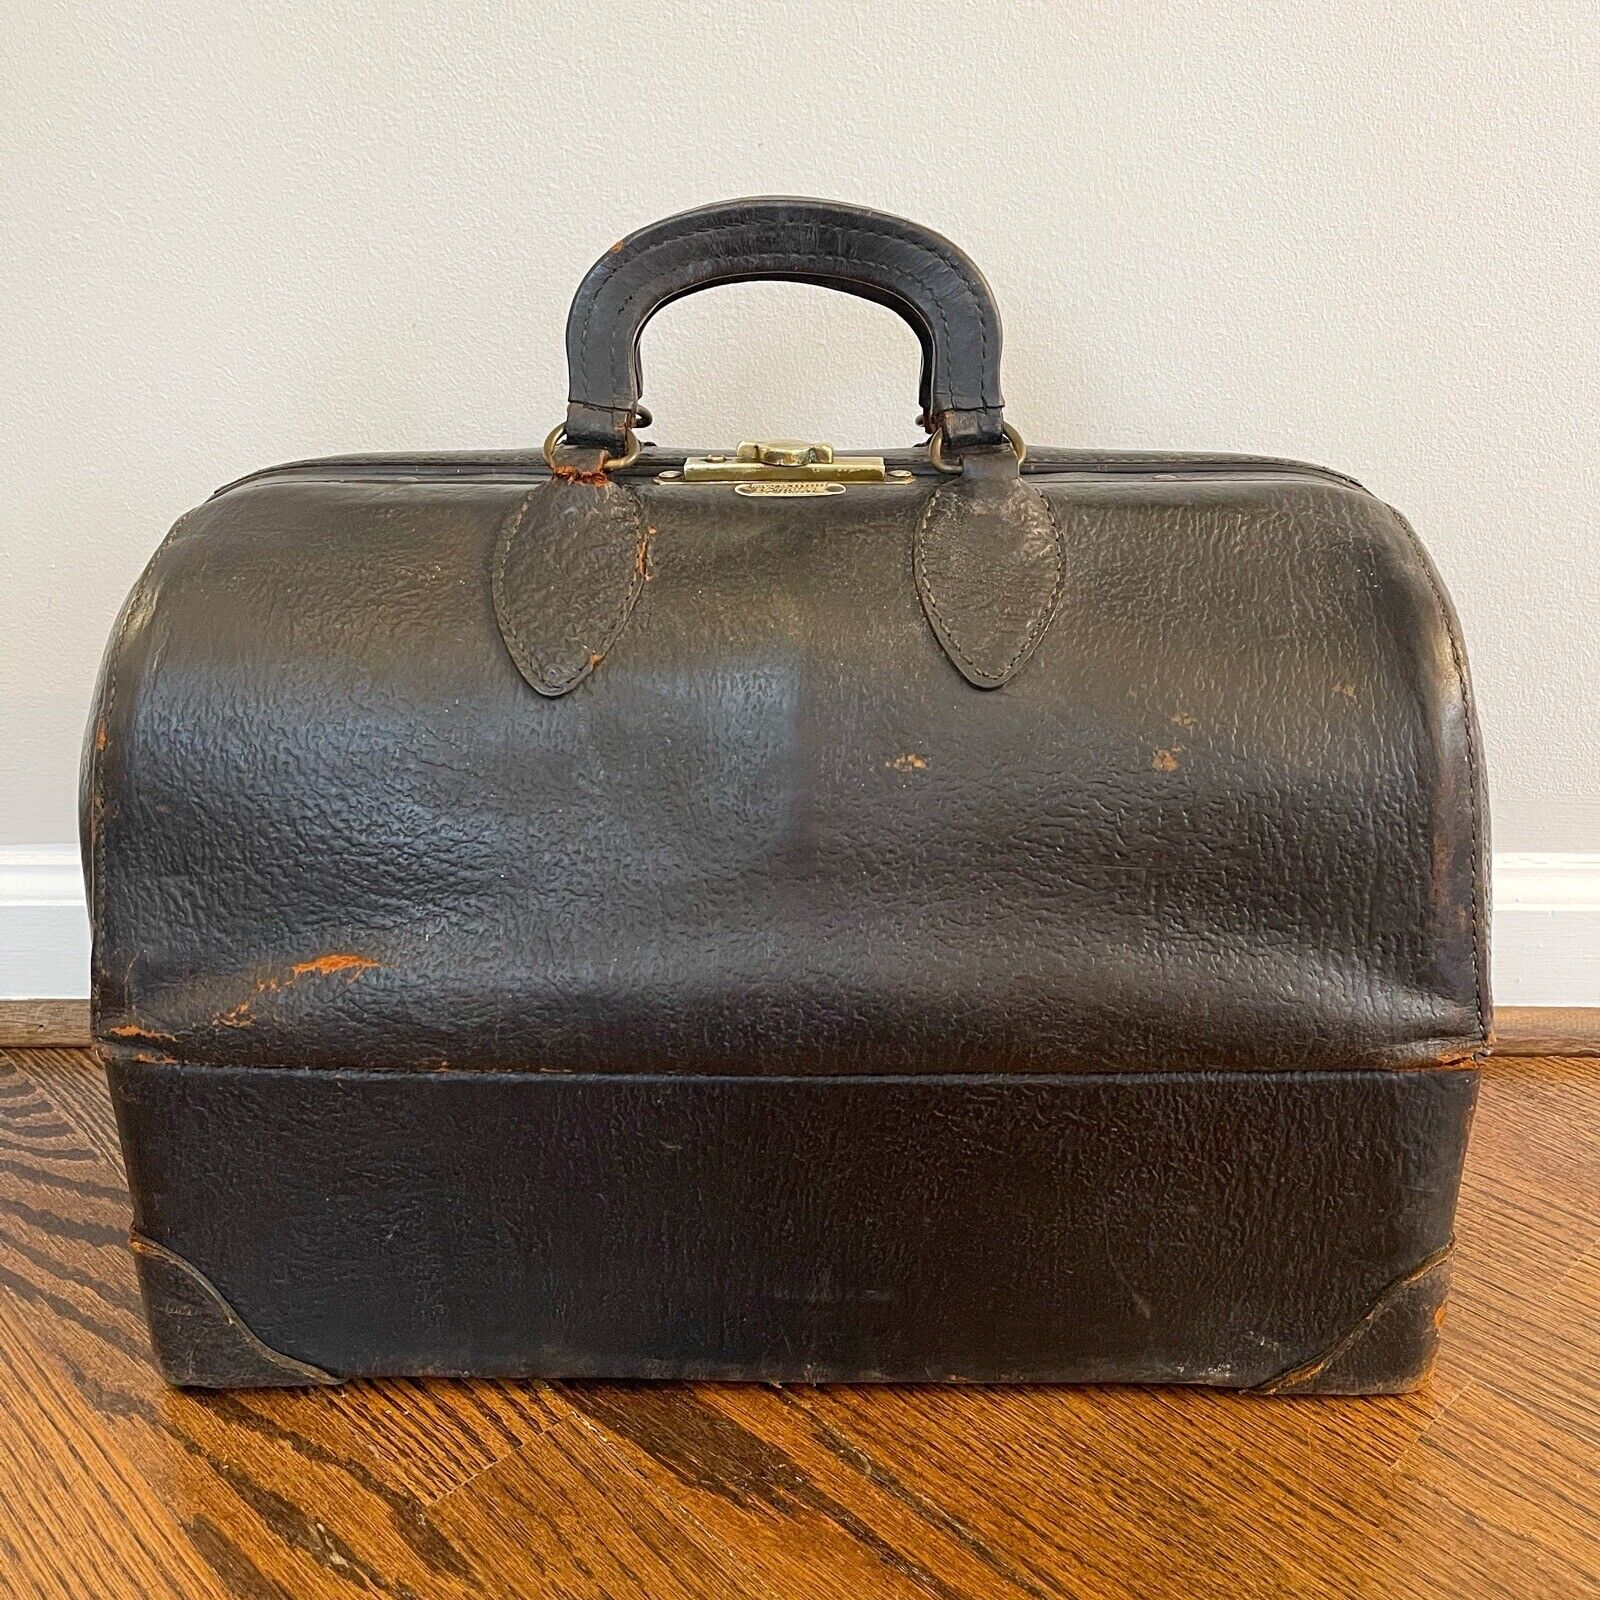 Antique 1940s Emdee by Schell Apothecary Traveling Doctor Medical Carrying Case